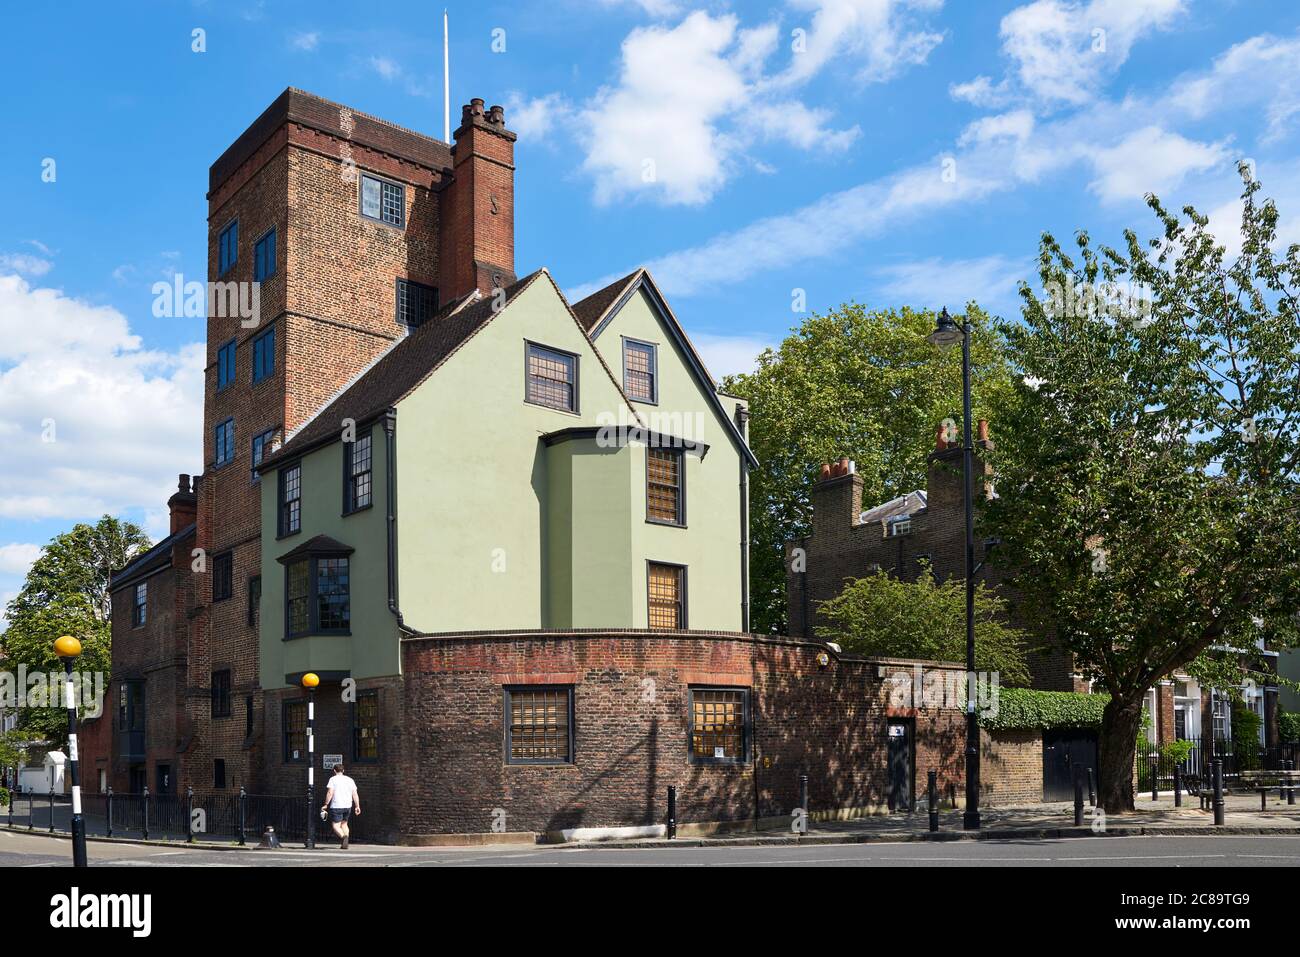 The exterior of the historic 16th century Canonbury Tower in the Canonbury district of North London, Southern England Stock Photo